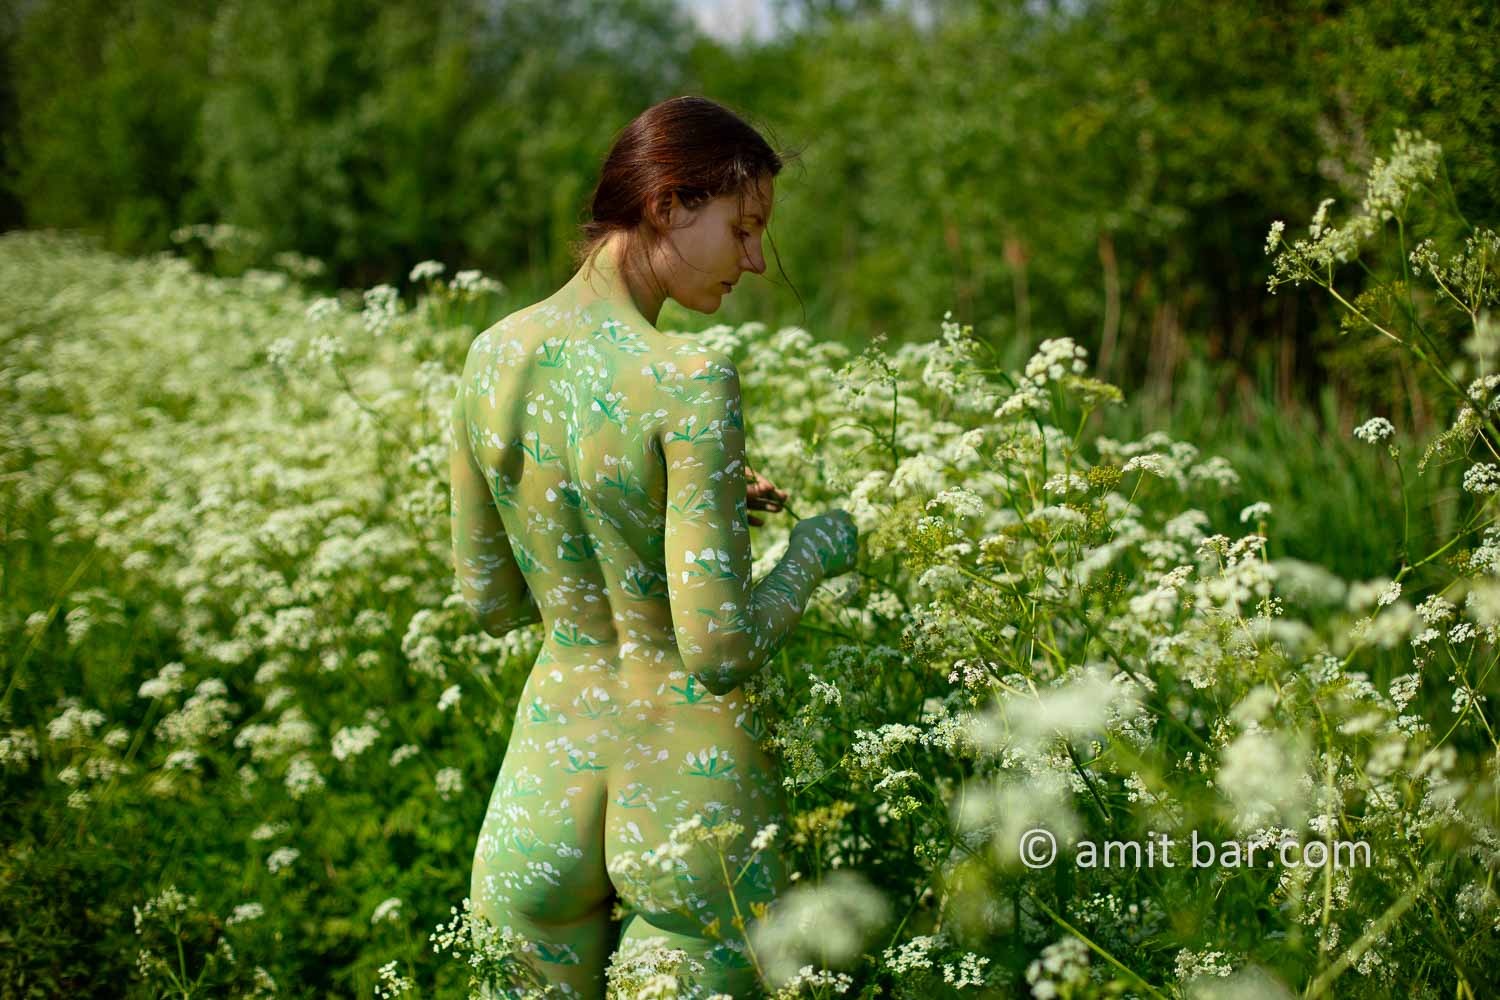 Cow parsley II: The wild plant Cow parsley inspired me to crate a body-painting on a sunny day besides my hometown.